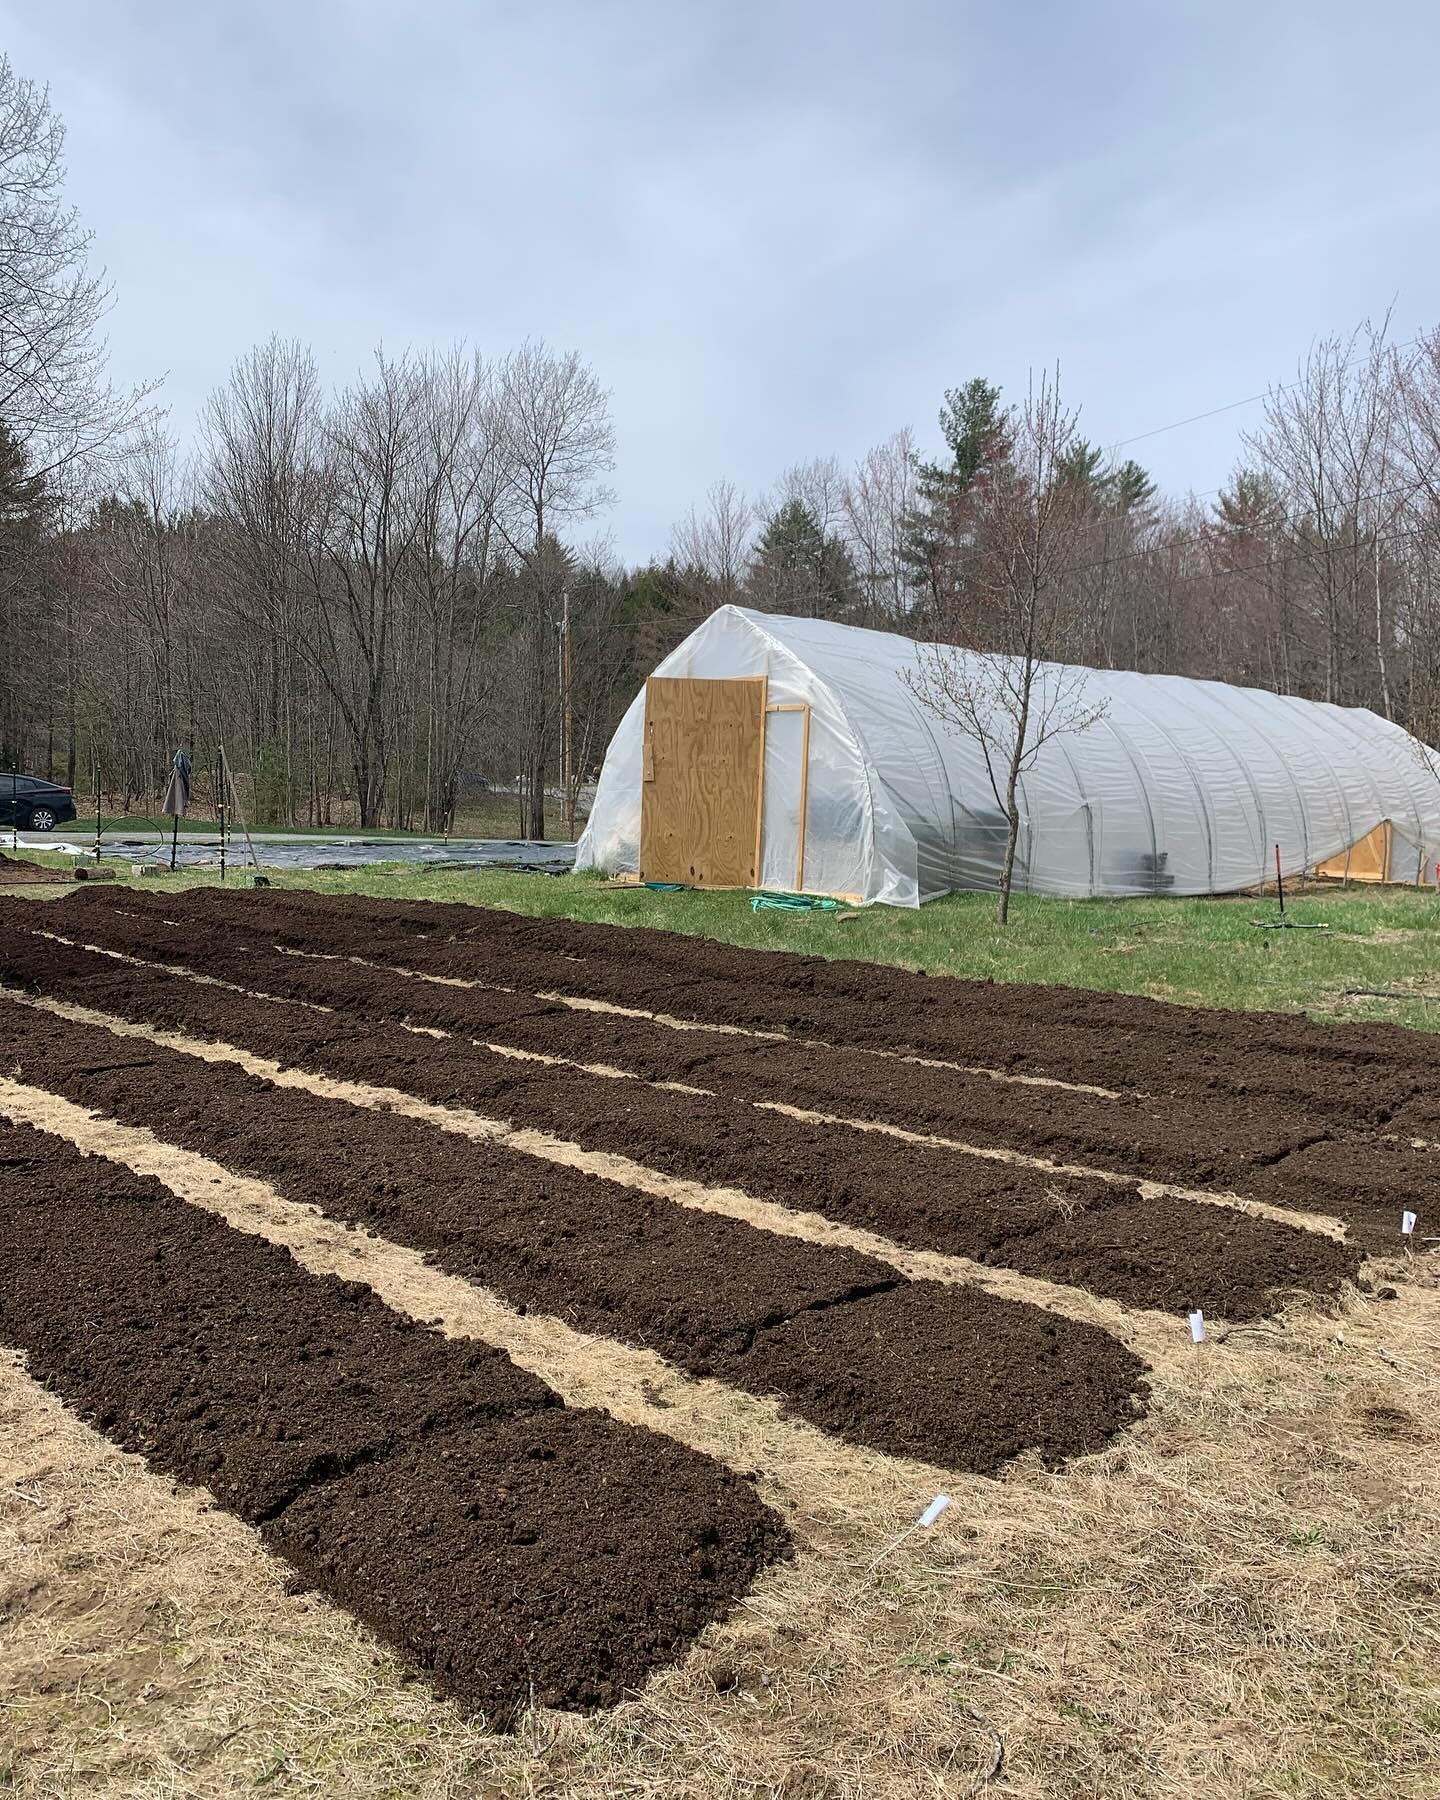 Six new beds happened today! Yaaaahhh people power. We tarped this area all winter to kill the grass, broadforked, and applied a thick layer of compost to add nutrients to our  sandy SANDY sandy loamy sand &ldquo;soil&rdquo;. The wooden frame really 